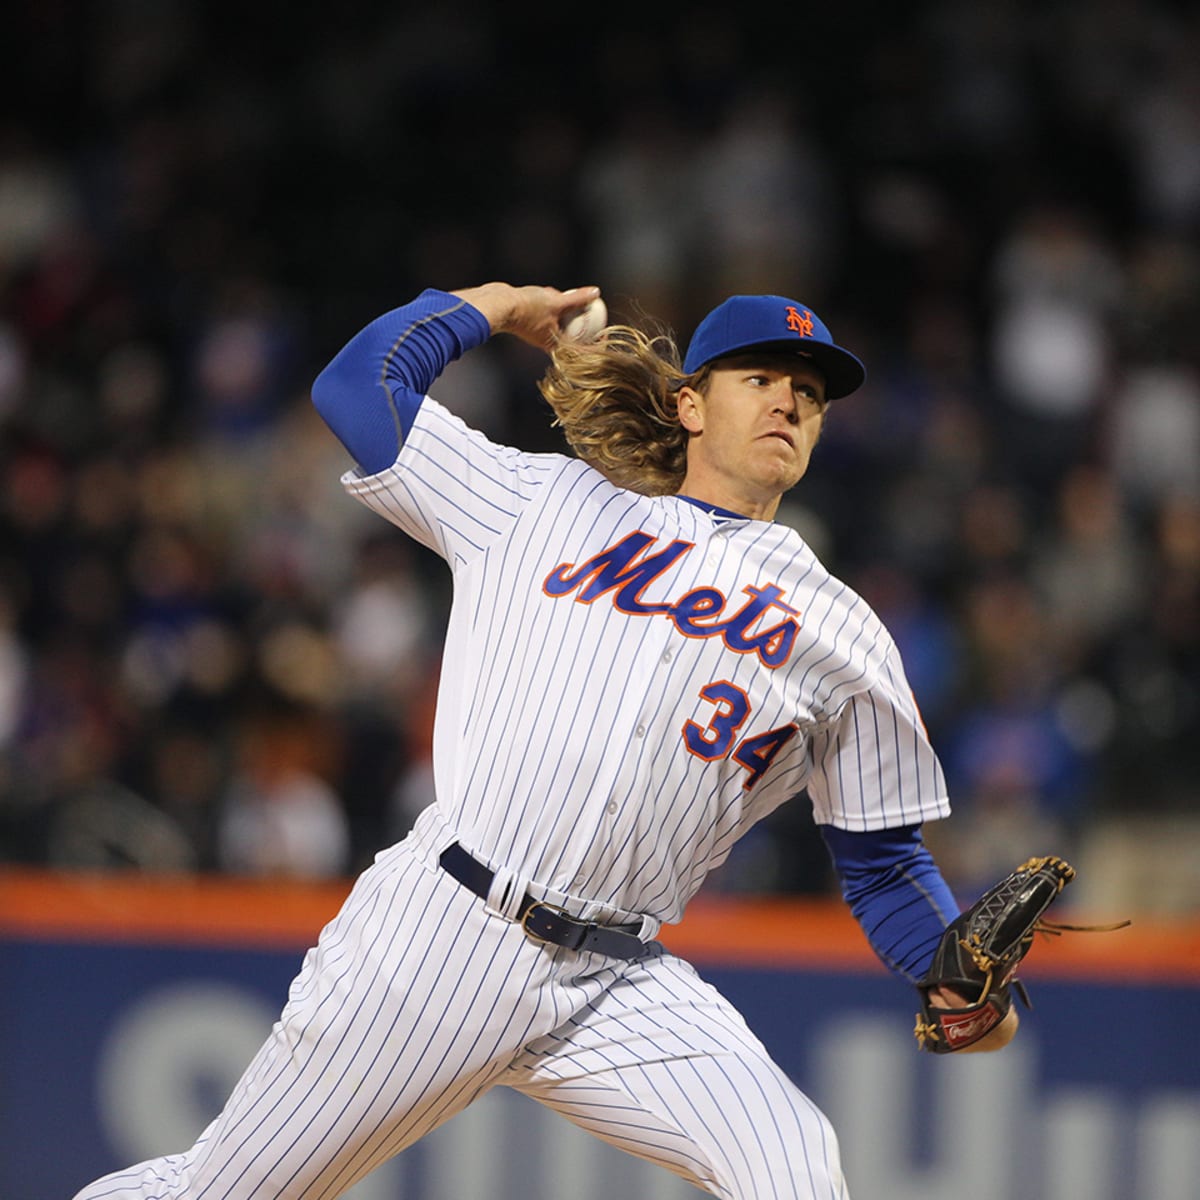 Noah Syndergaard Is Hard to Miss on a Playing Field - The New York